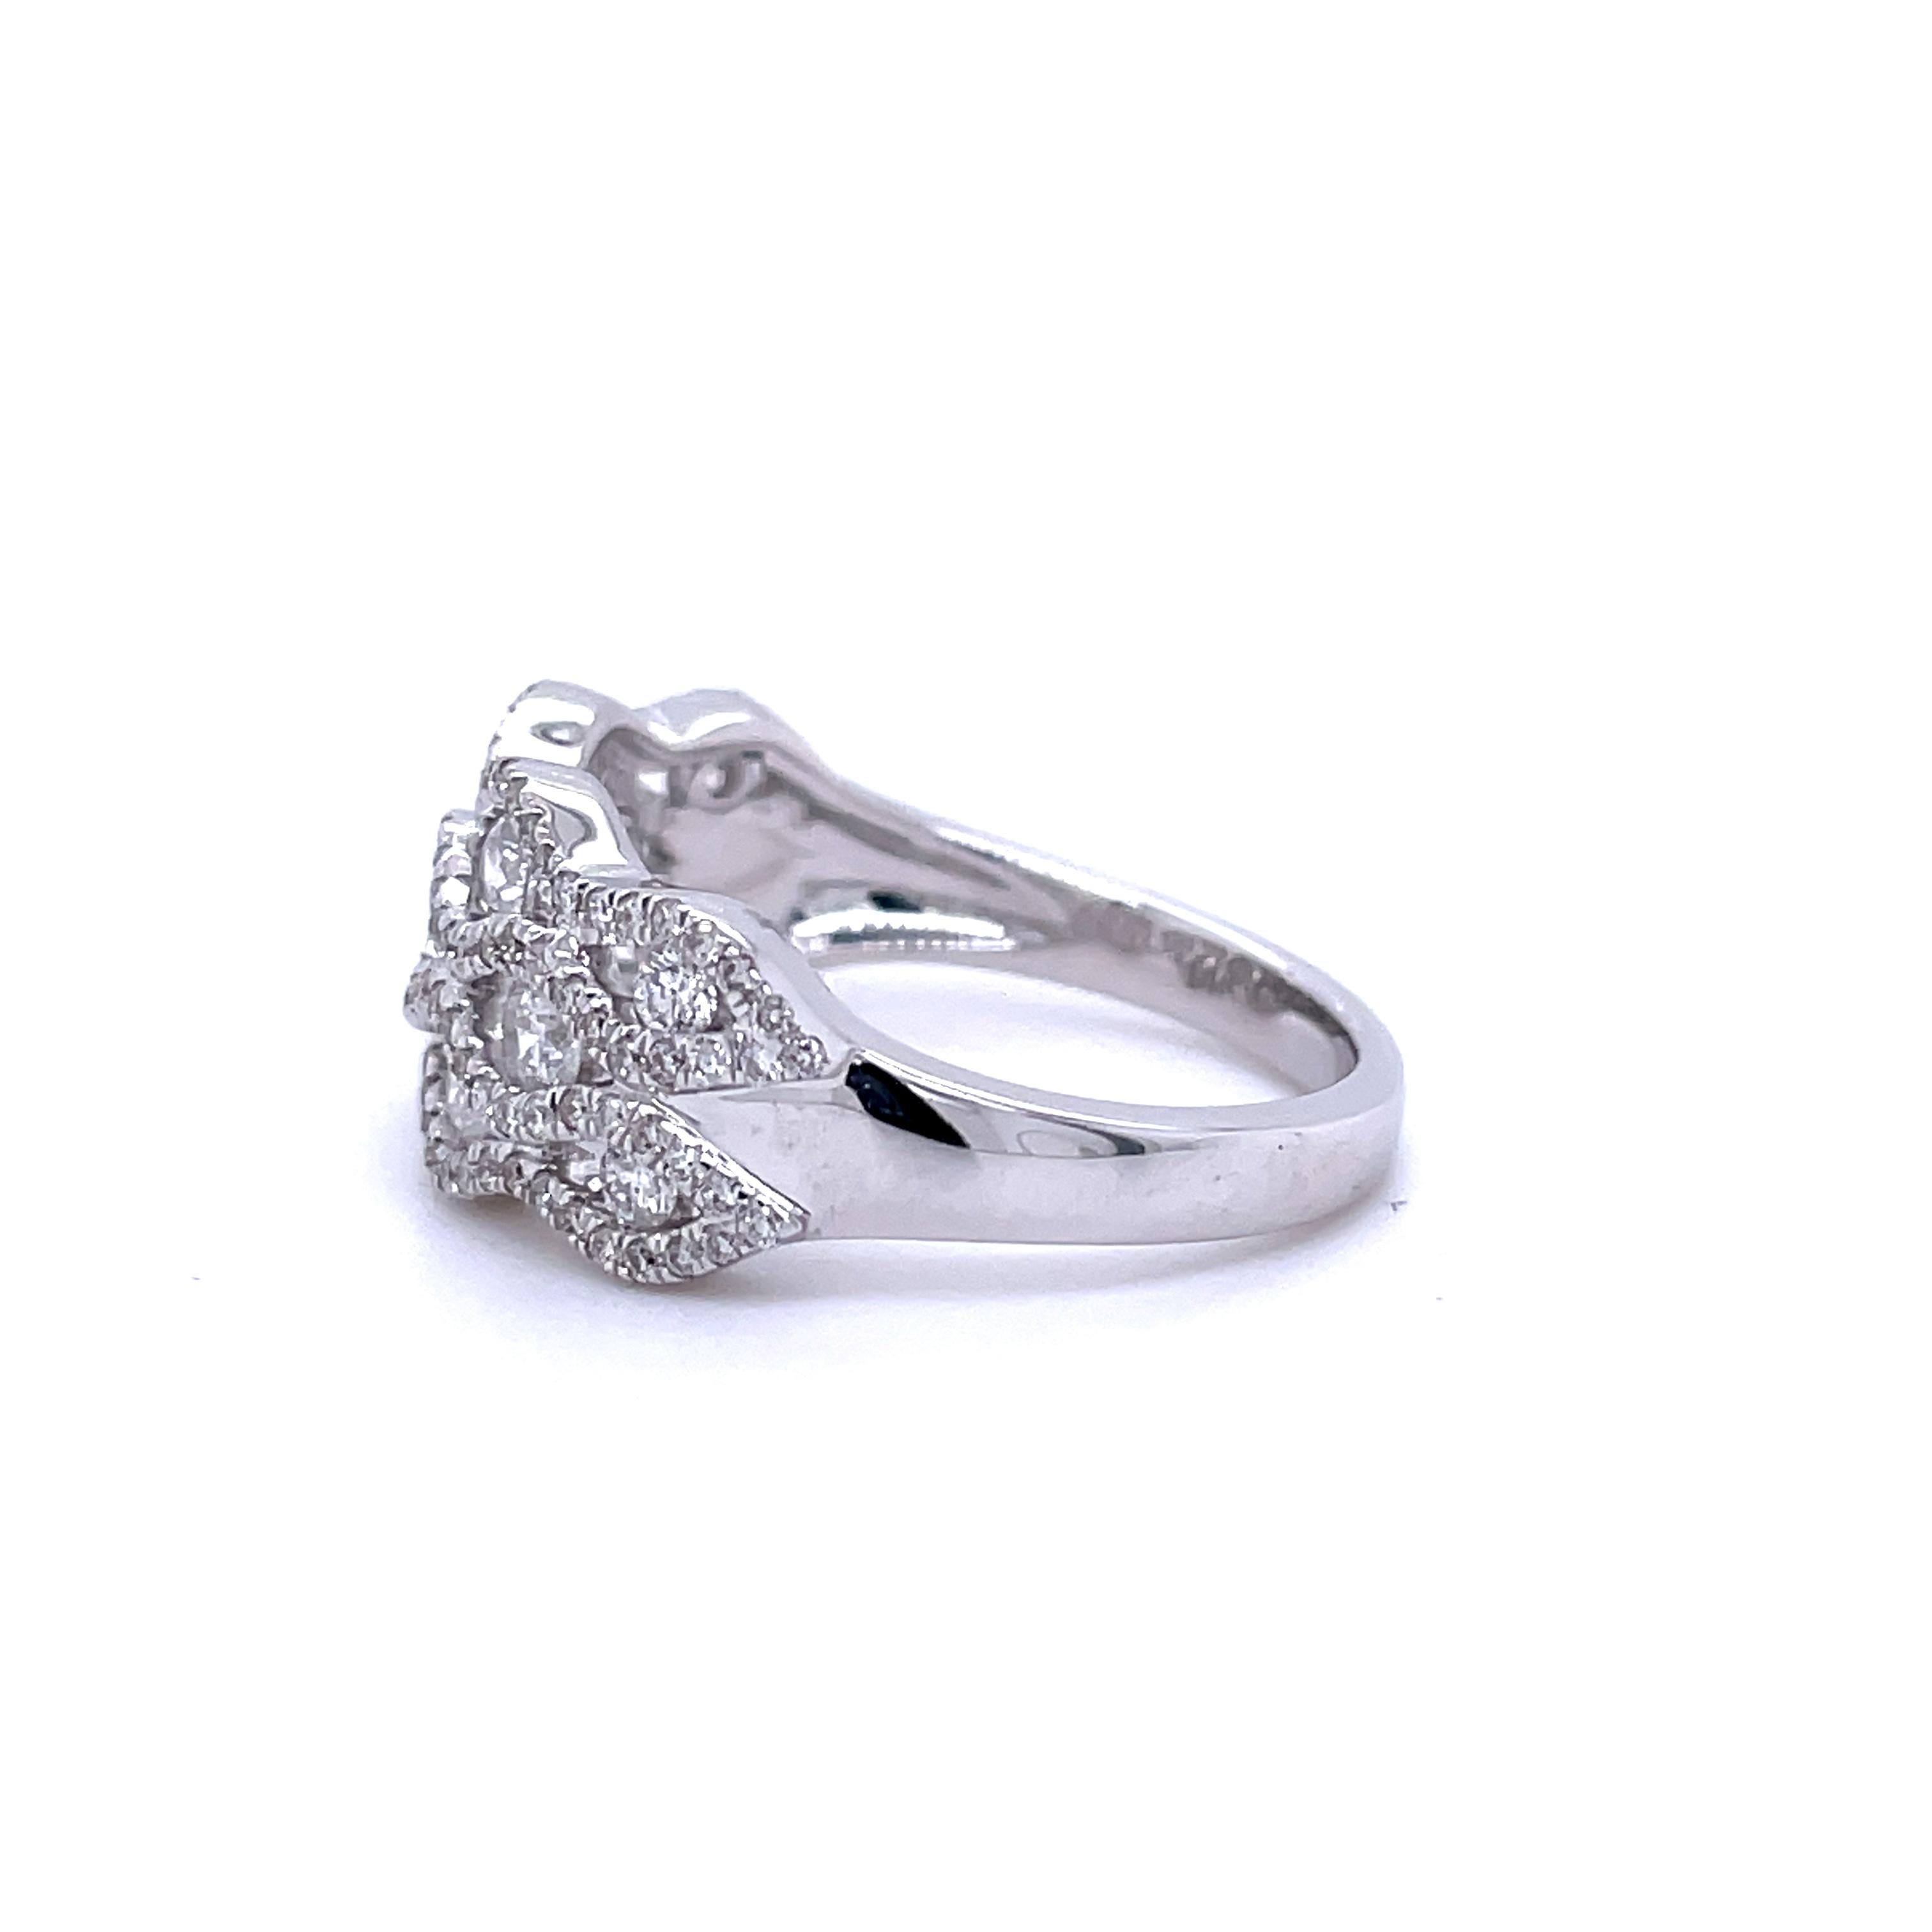 An exquisitely designed cocktail ring crafted in luxurious 14 karat white gold showcasing 129 round brilliant diamonds weighing 1 CTTW (H-I color I1 clarity) This is an amazing eye-catching design that can be worn on any finger for any occasion and